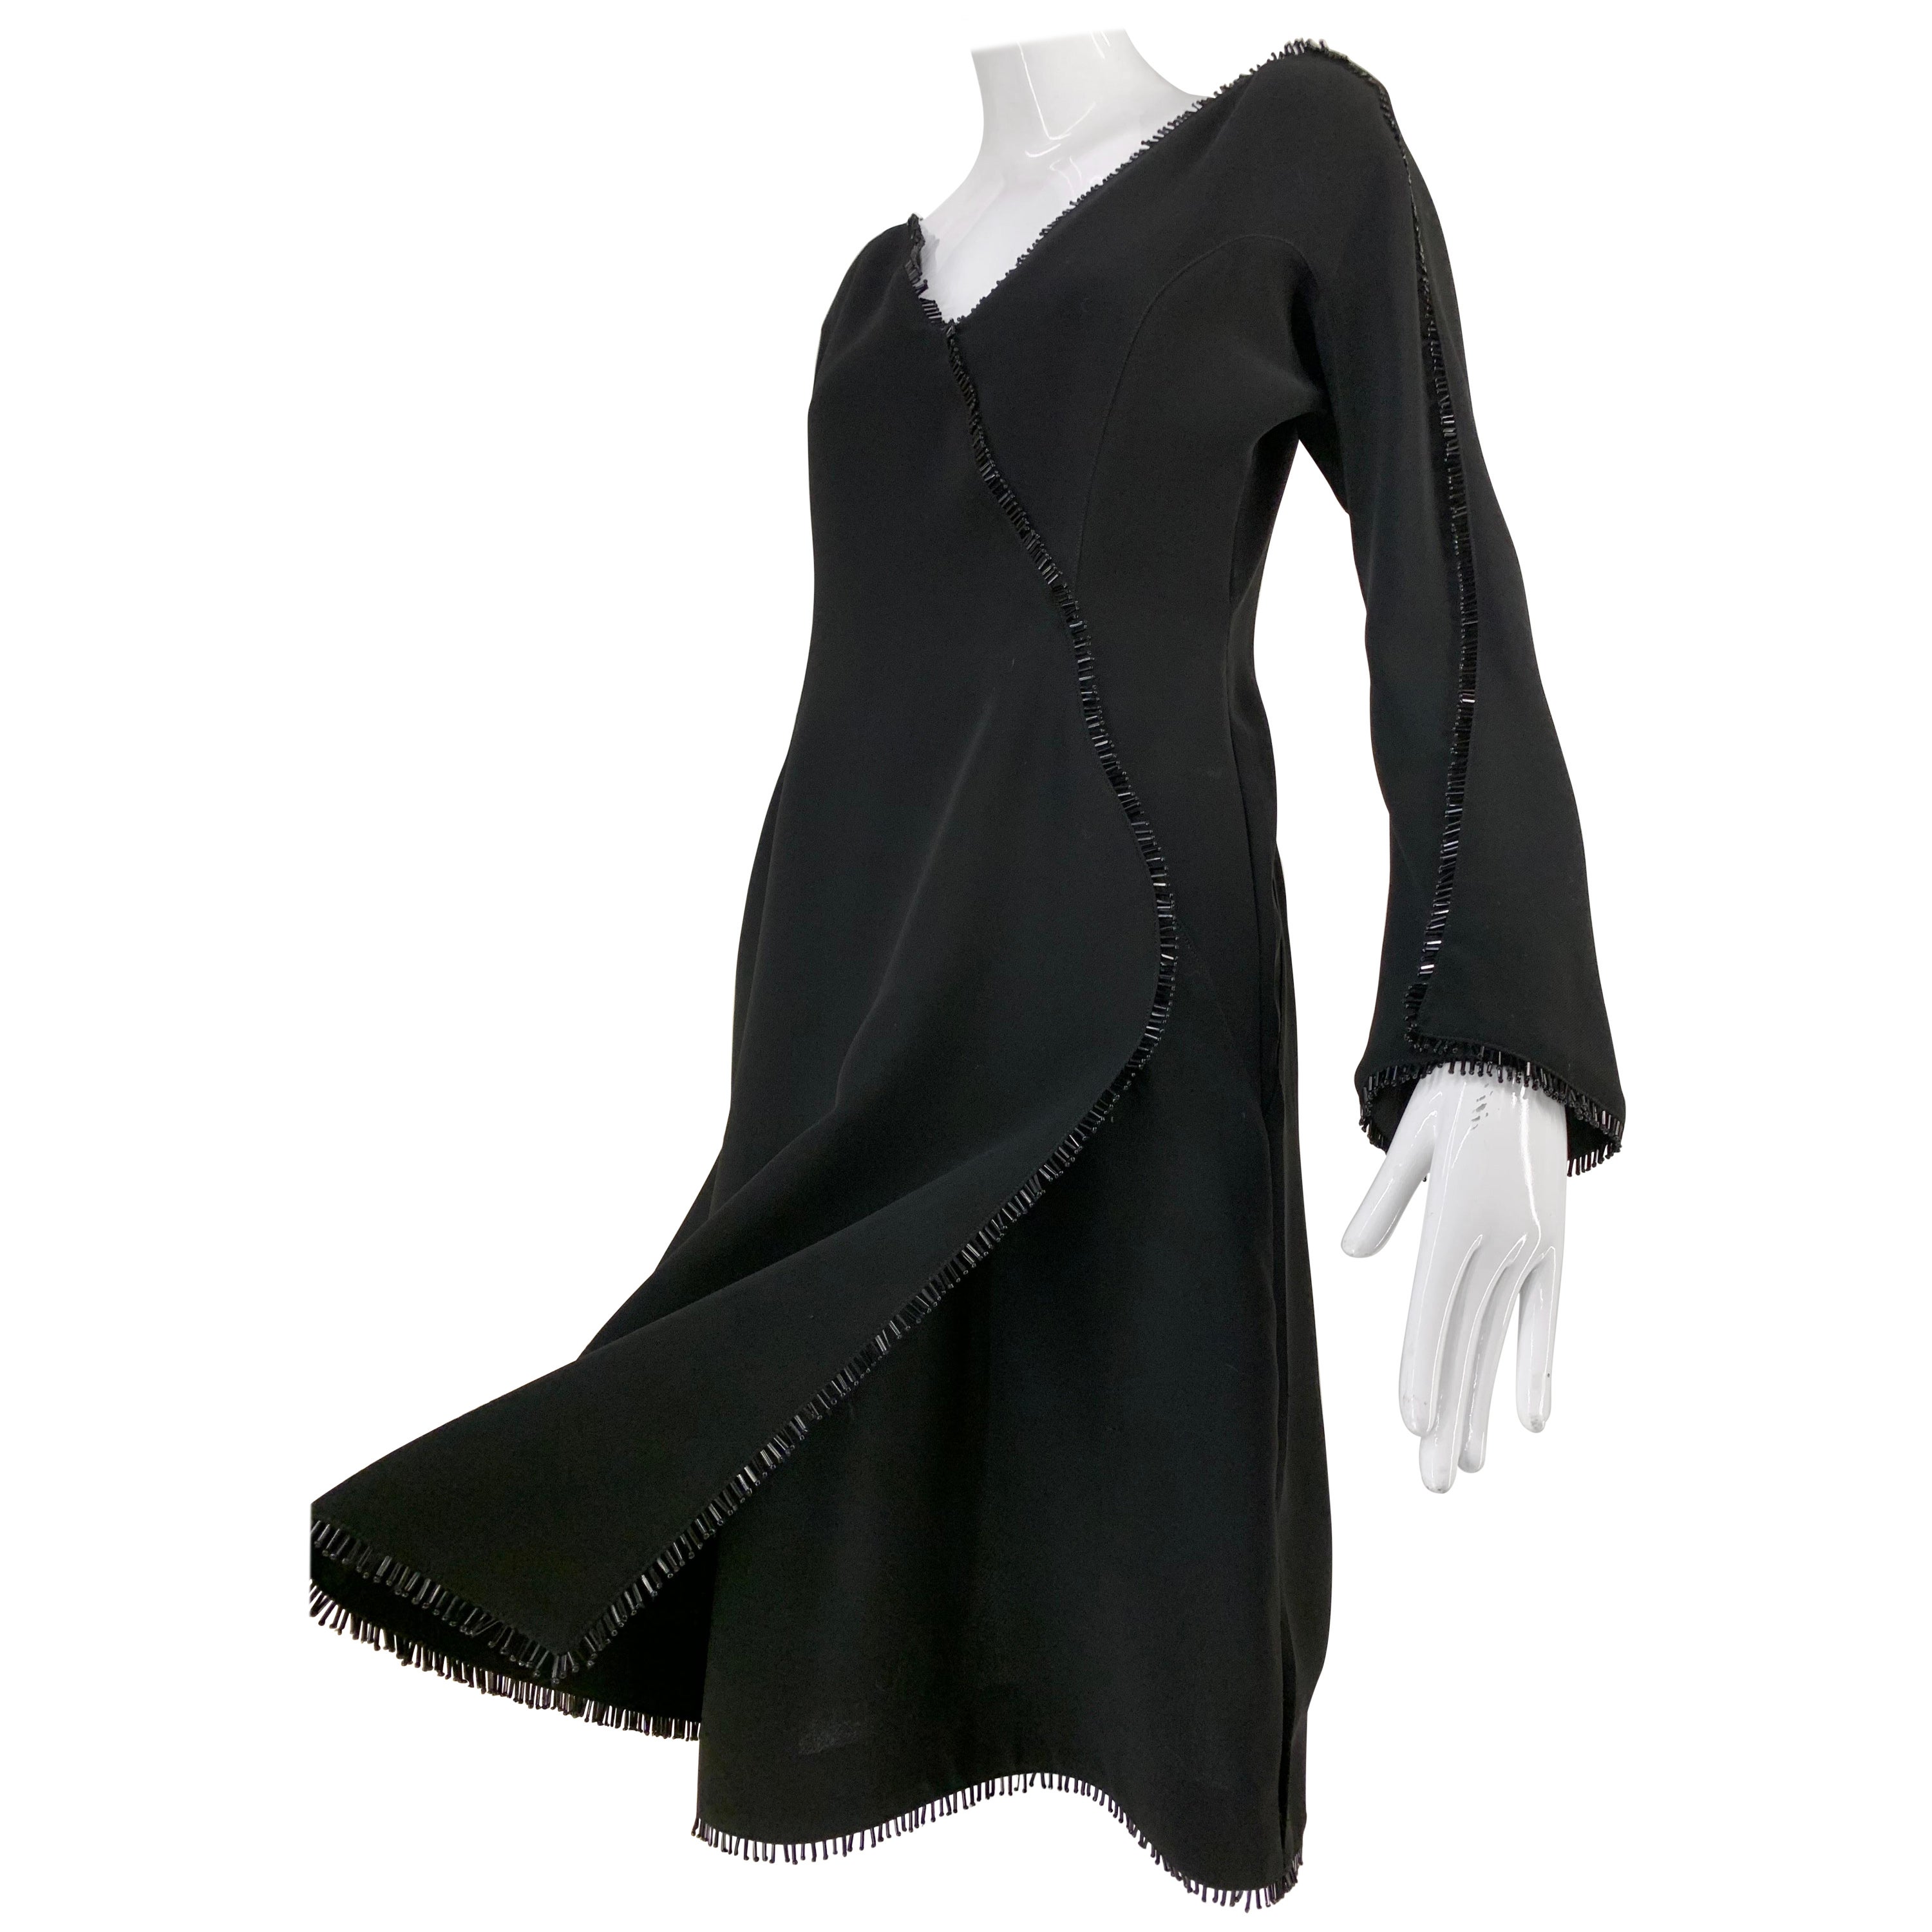 1990s Thierry Mugler Fit & Flare Wrap Style Black Cocktail Dress w Bead Fringe  For Sale